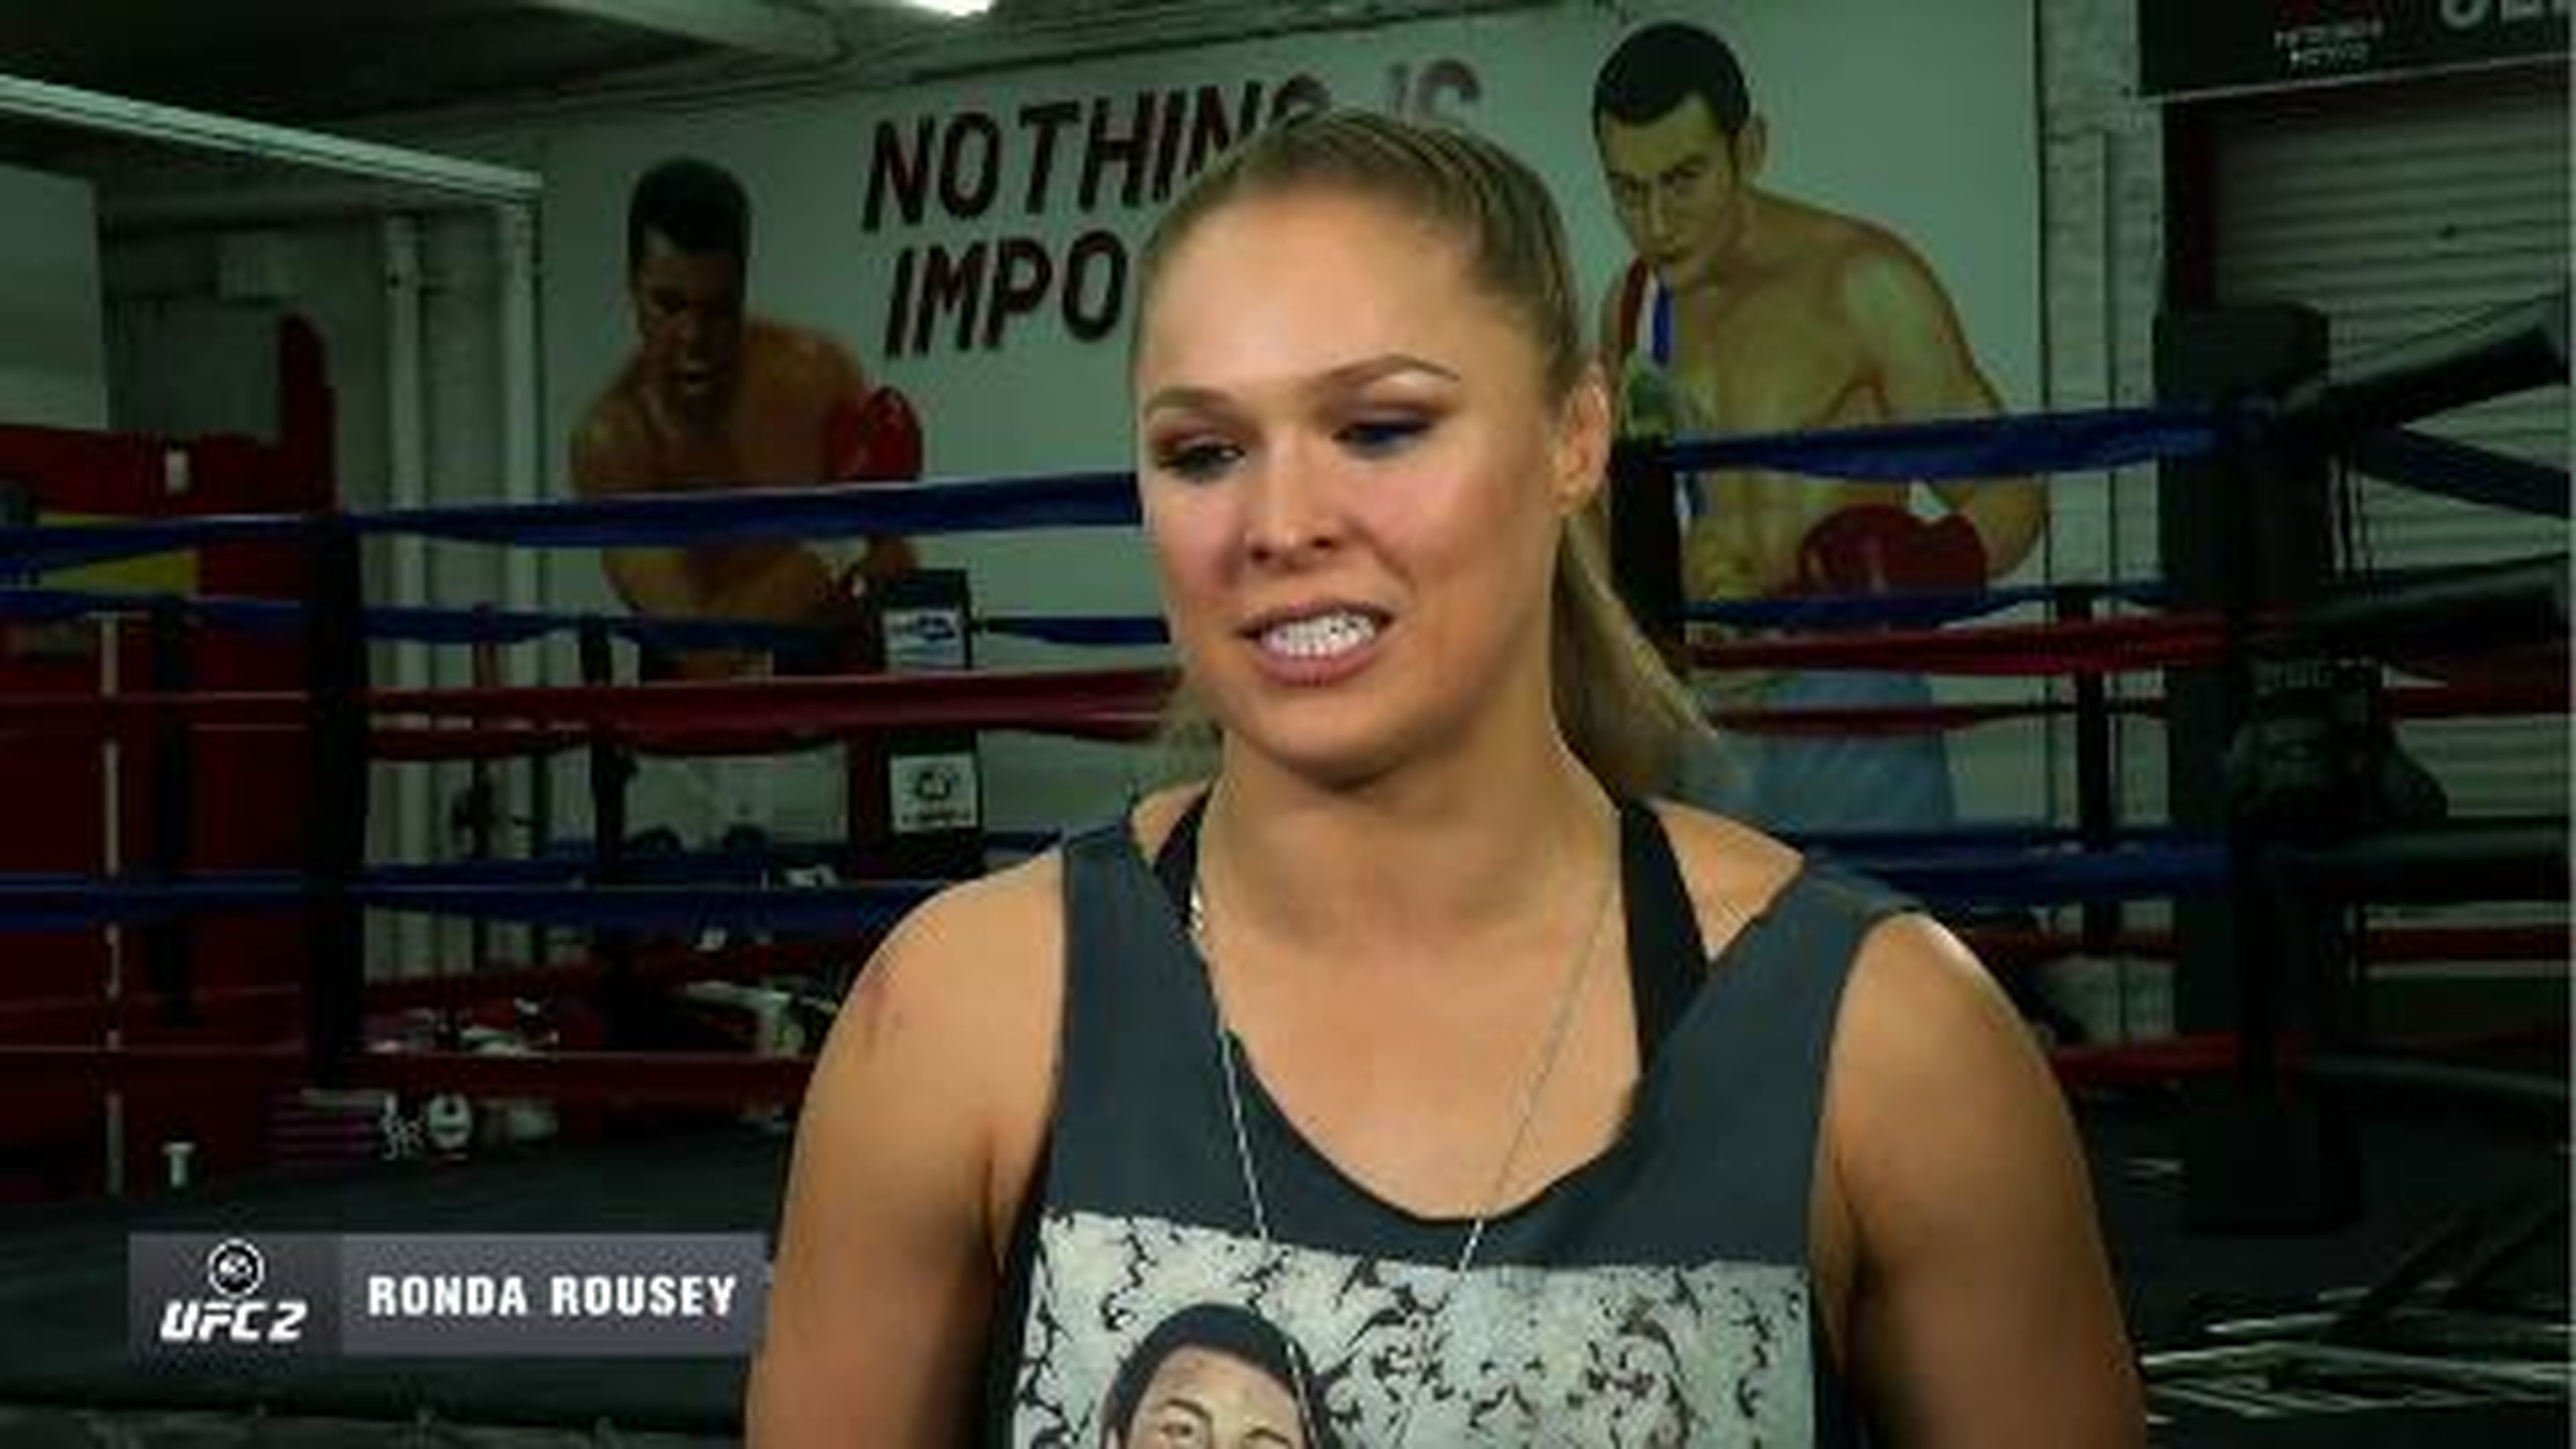 EA SPORTS UFC 2 - Ronda Rousey Cover Announce - Xbox One, PS4